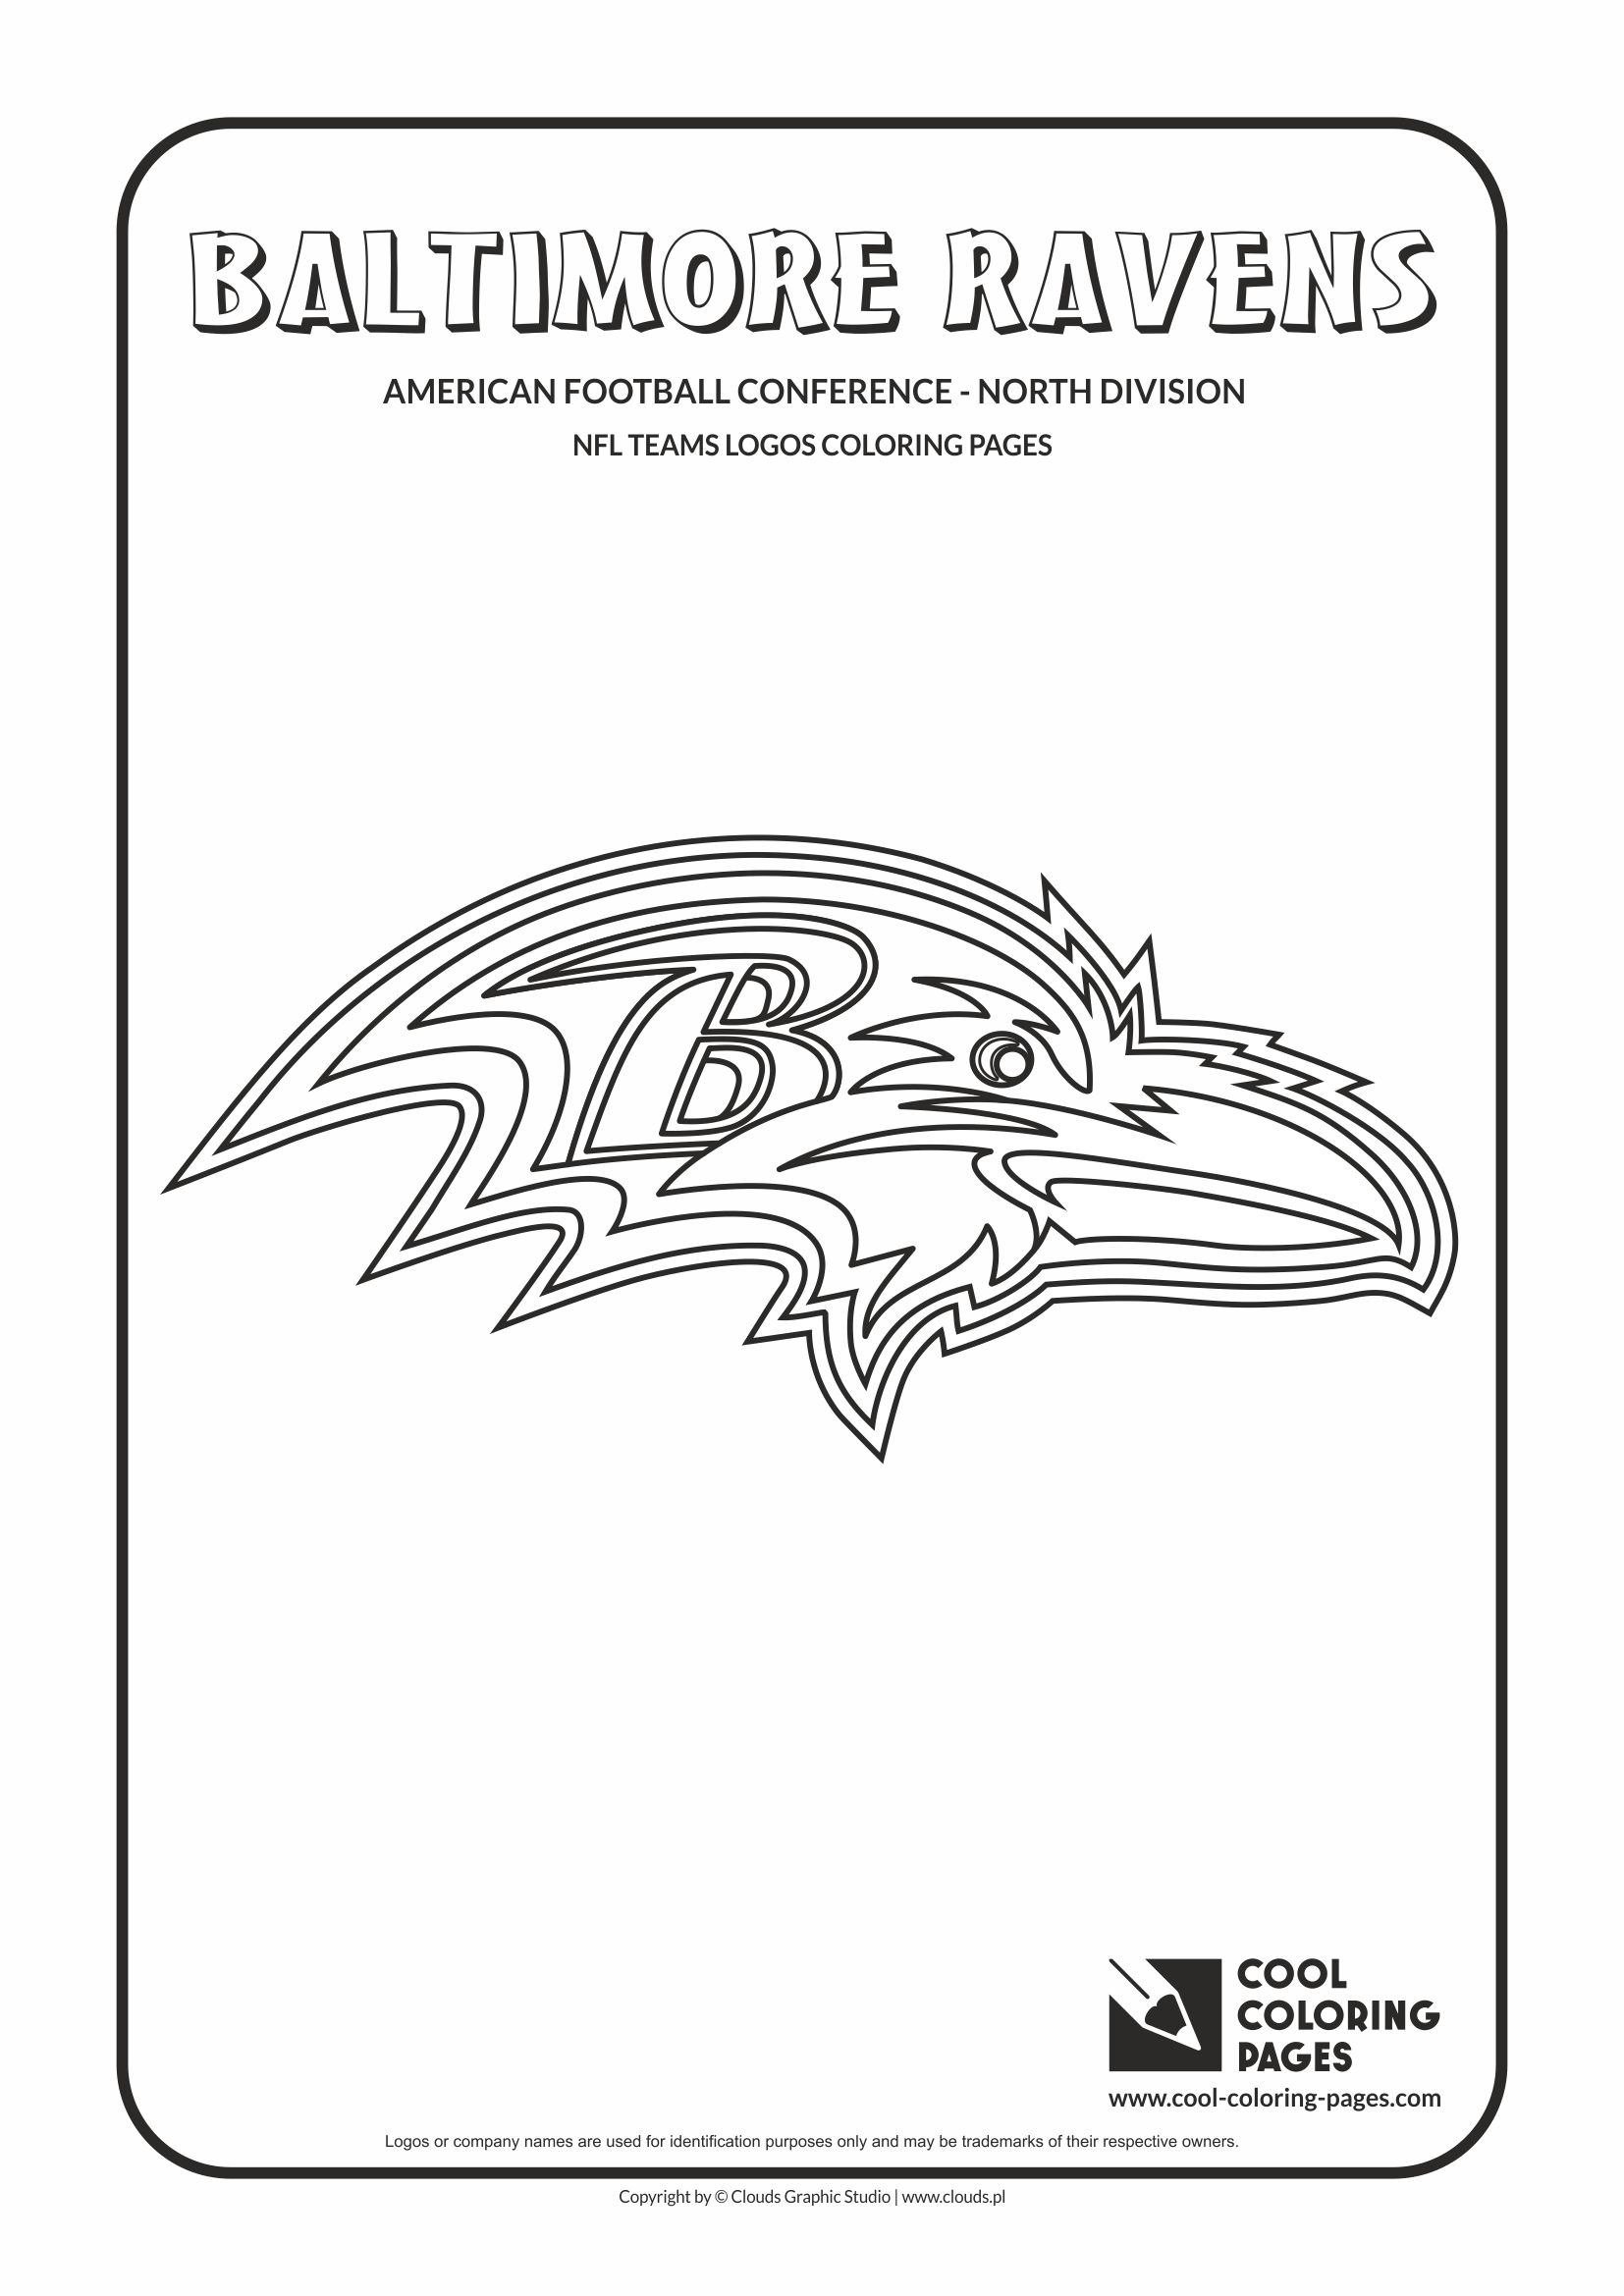 Cool Coloring Pages - NFL American Football Clubs Logos - American Football Conference - North Division / Baltimore Ravens logo / Coloring page with Baltimore Ravens logo